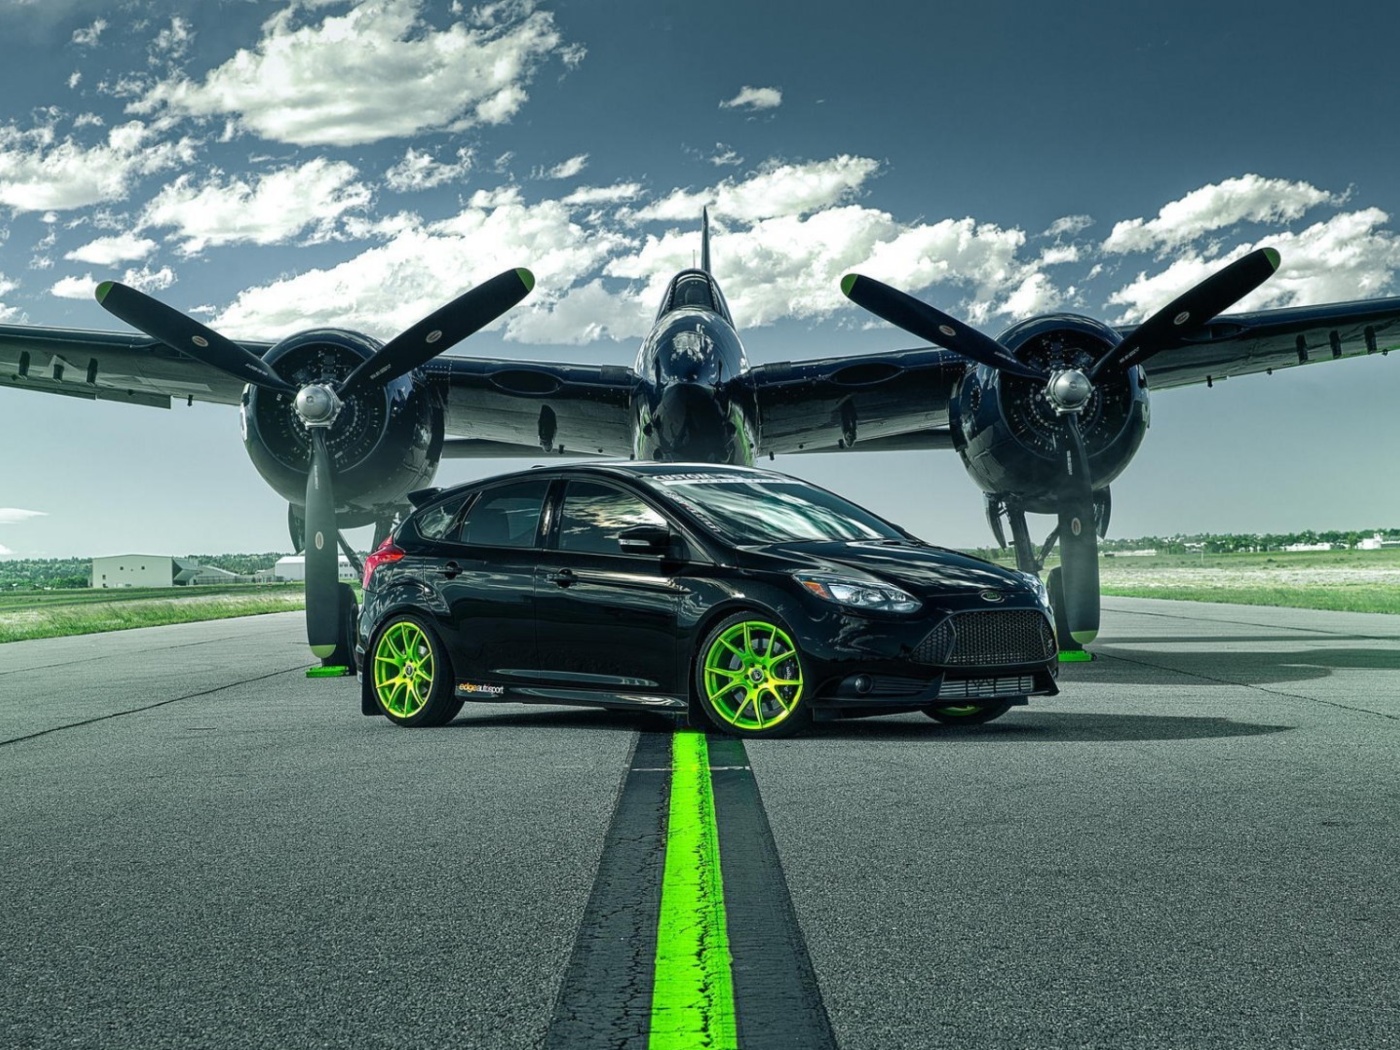 Das Ford Focus ST with Jet Wallpaper 1400x1050